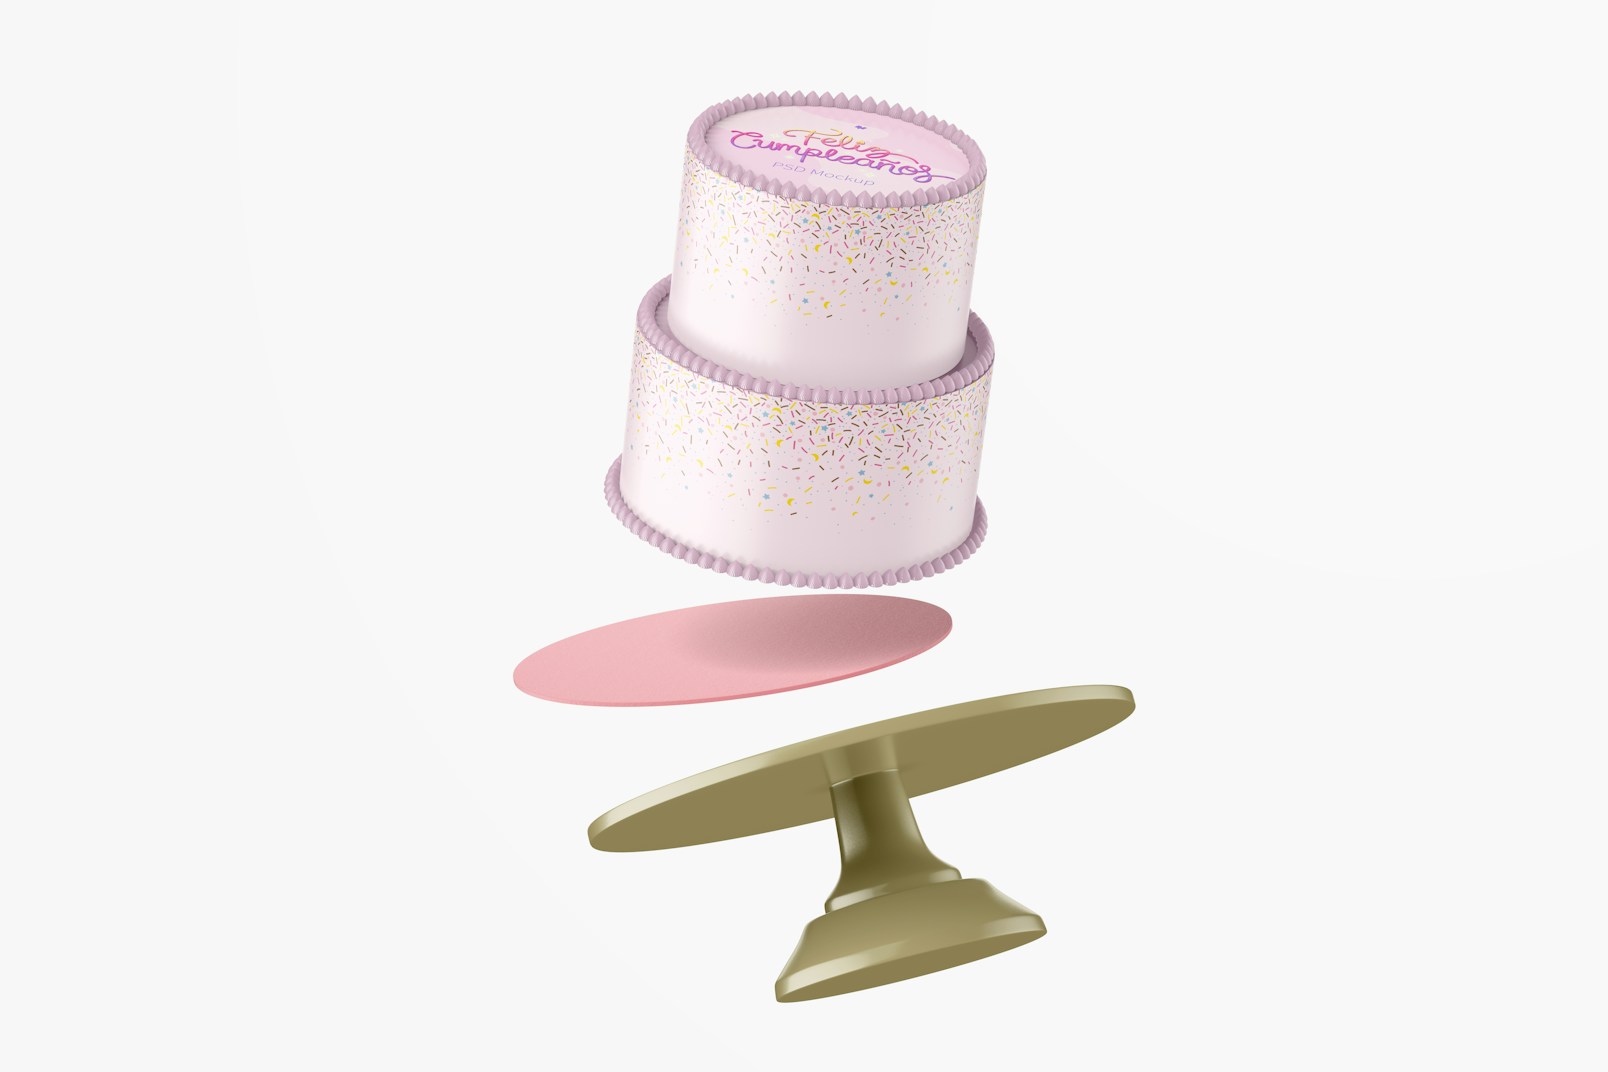 Two Tier Cake Mockup, Floating